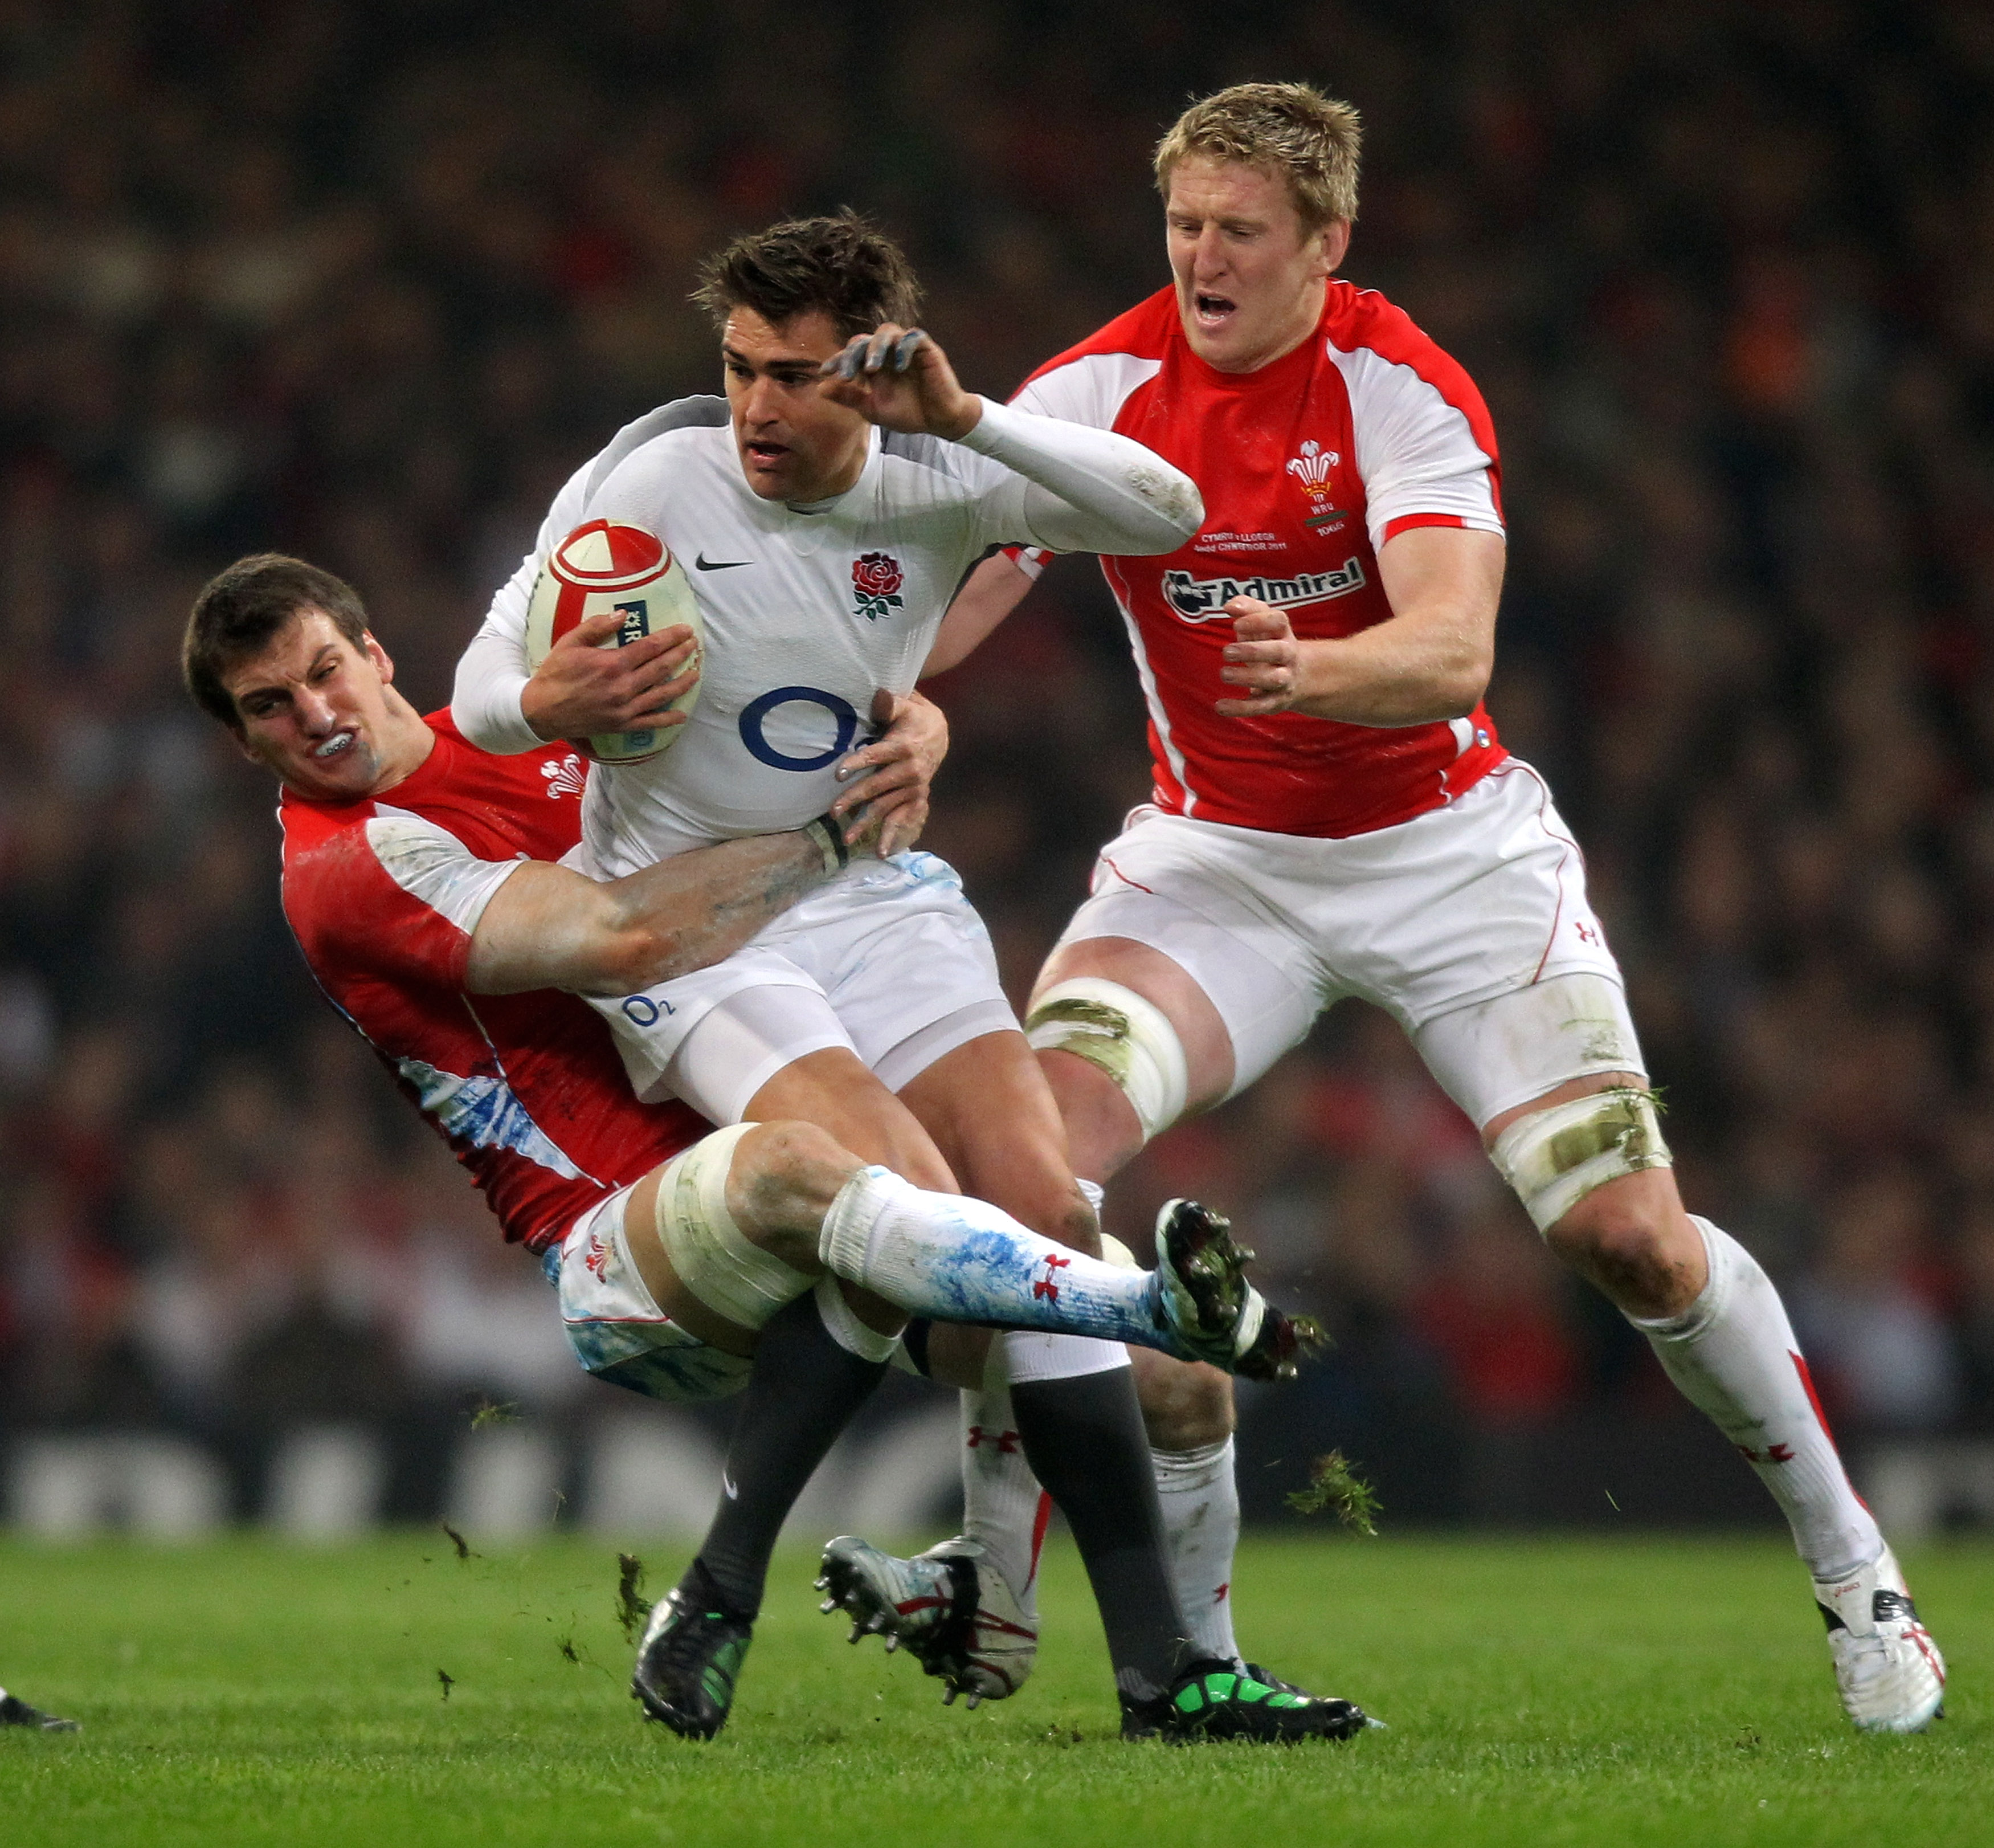 CARDIFF, WALES - FEBRUARY 04:  Toby Flood of England is tackled by Sam Warburton (L) and Bradley Davies (R) of Wales during the RBS 6 Nations Championship match between Wales and England at the Millennium Stadium on February 4, 2011 in Cardiff, Wales.  (P